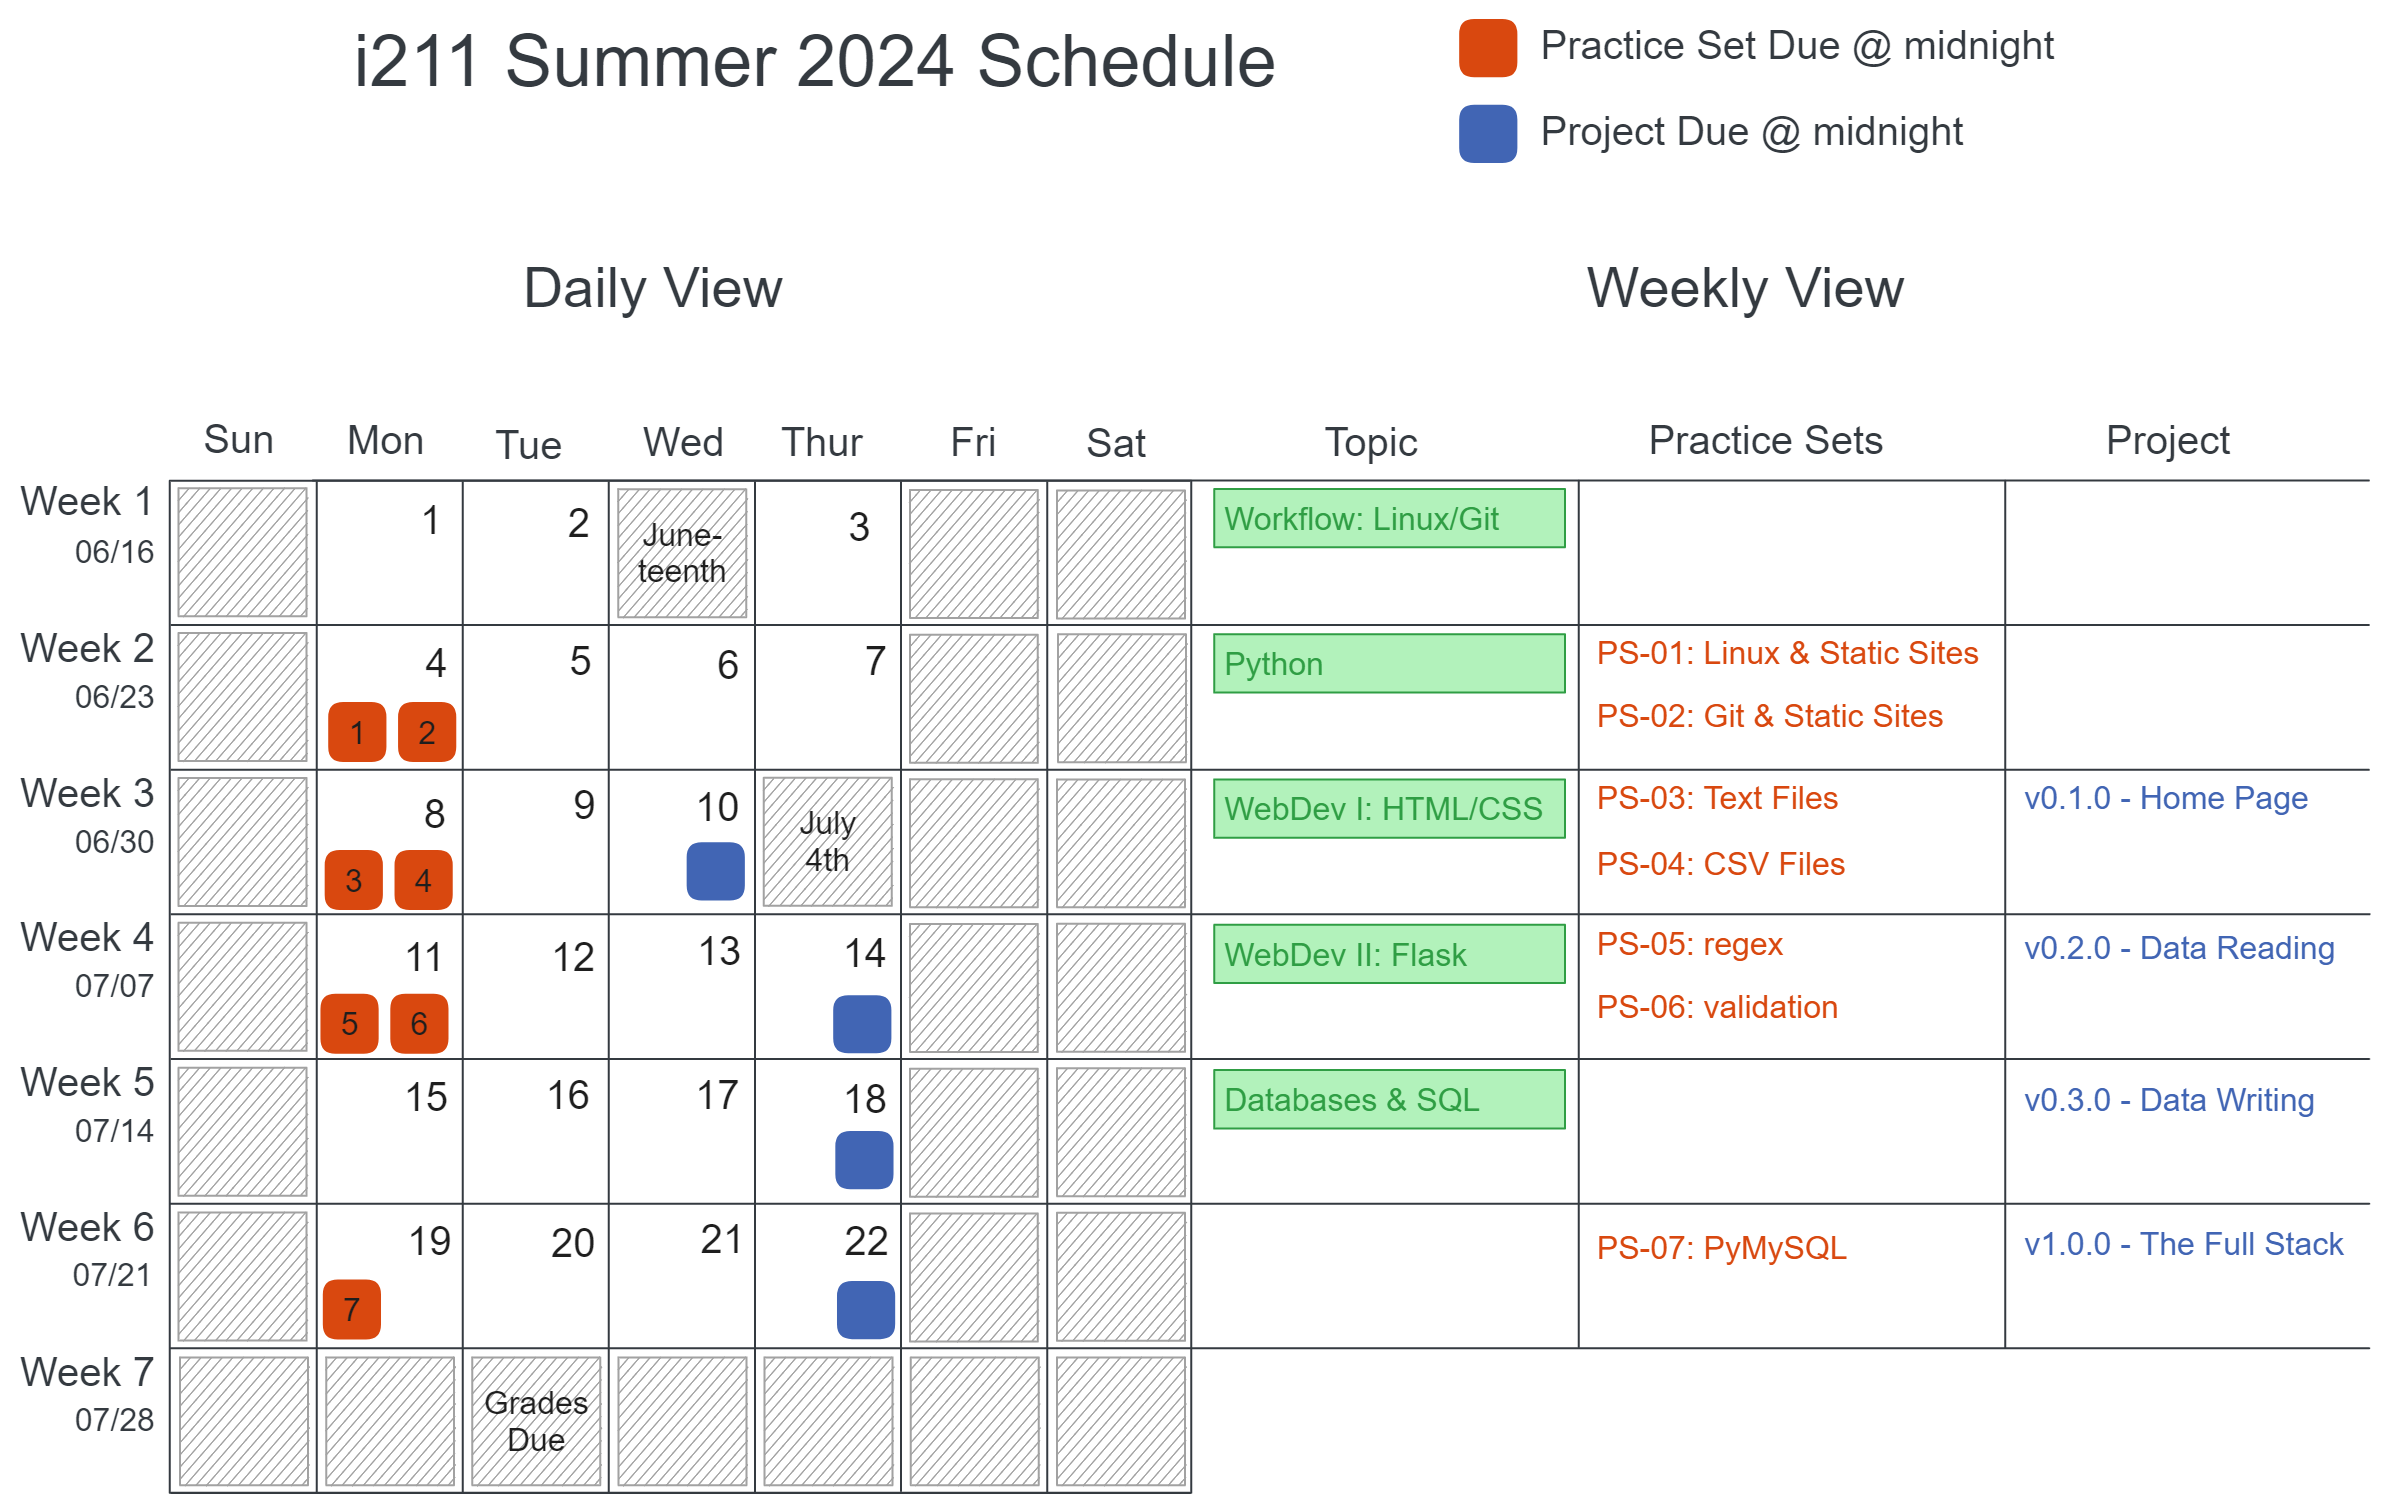 i211 spring 2024 calendar, with 17 rows representing weeks and 7 rows representing Sunday through Saturday. The class is divided into three units, practice sets are due on Tuesdays, and project deadlines are on Fridays.